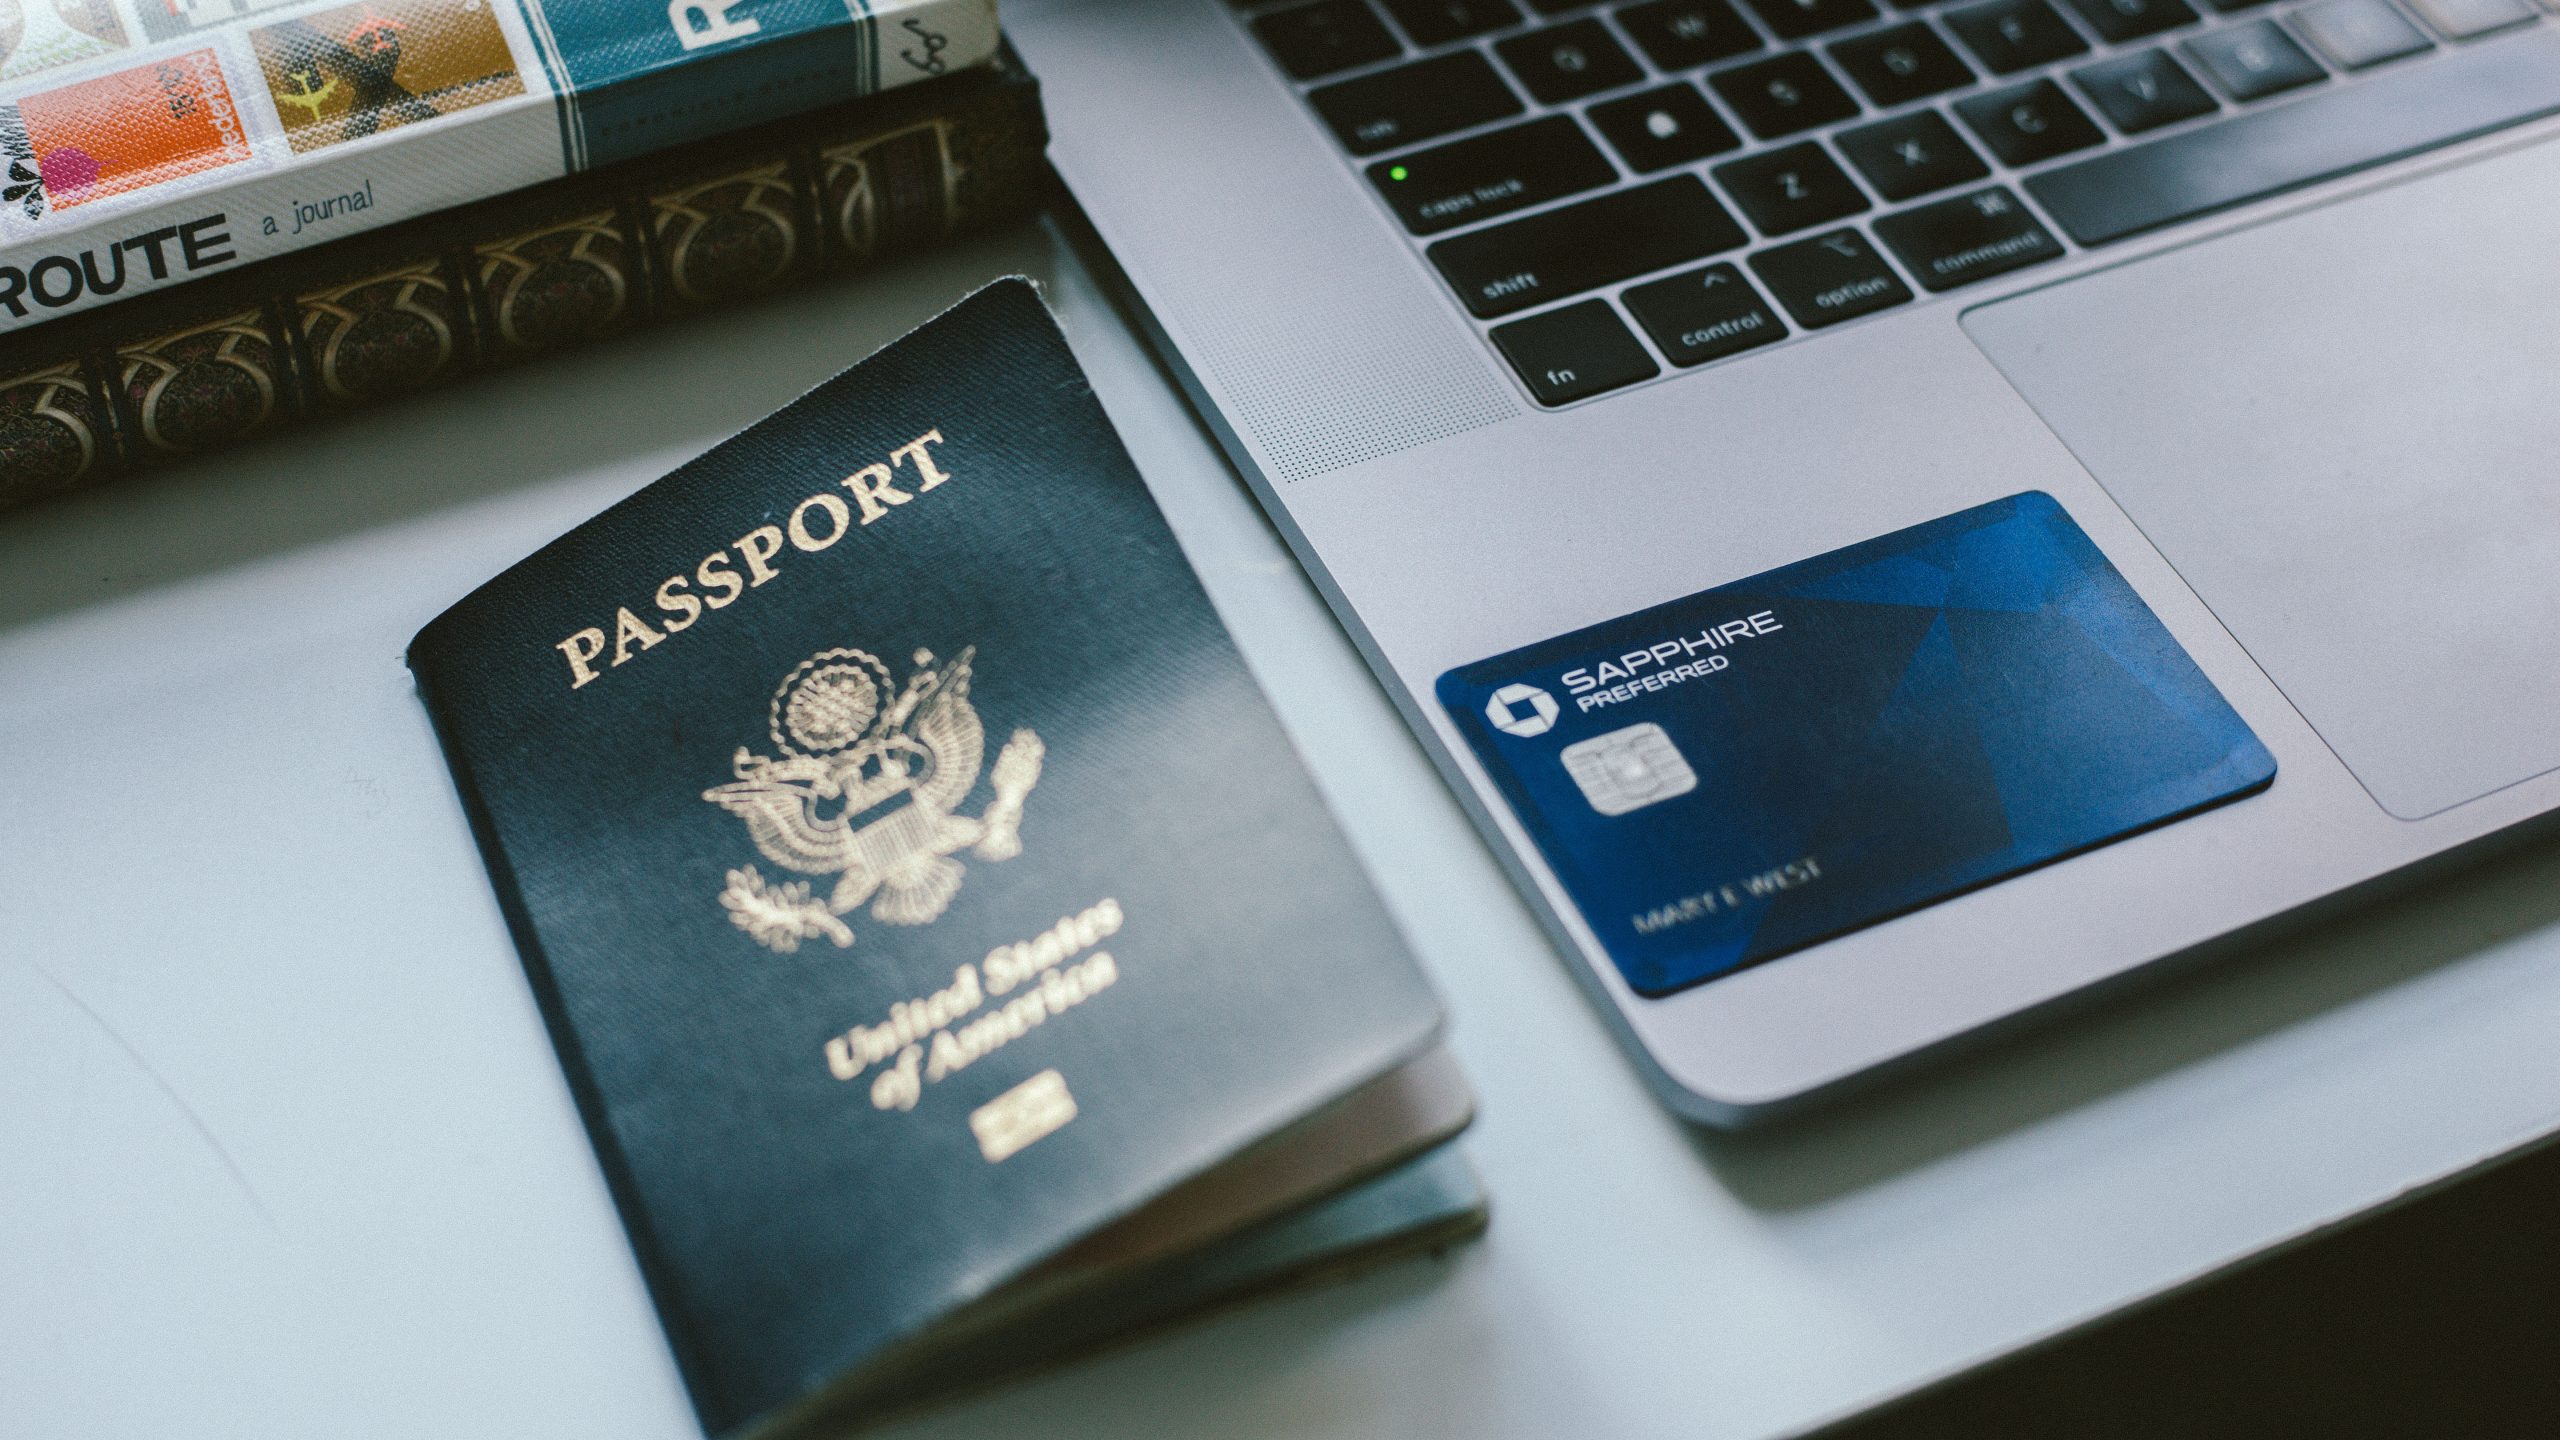 A passport and a Chase Sapphire Preferred card on the laptop